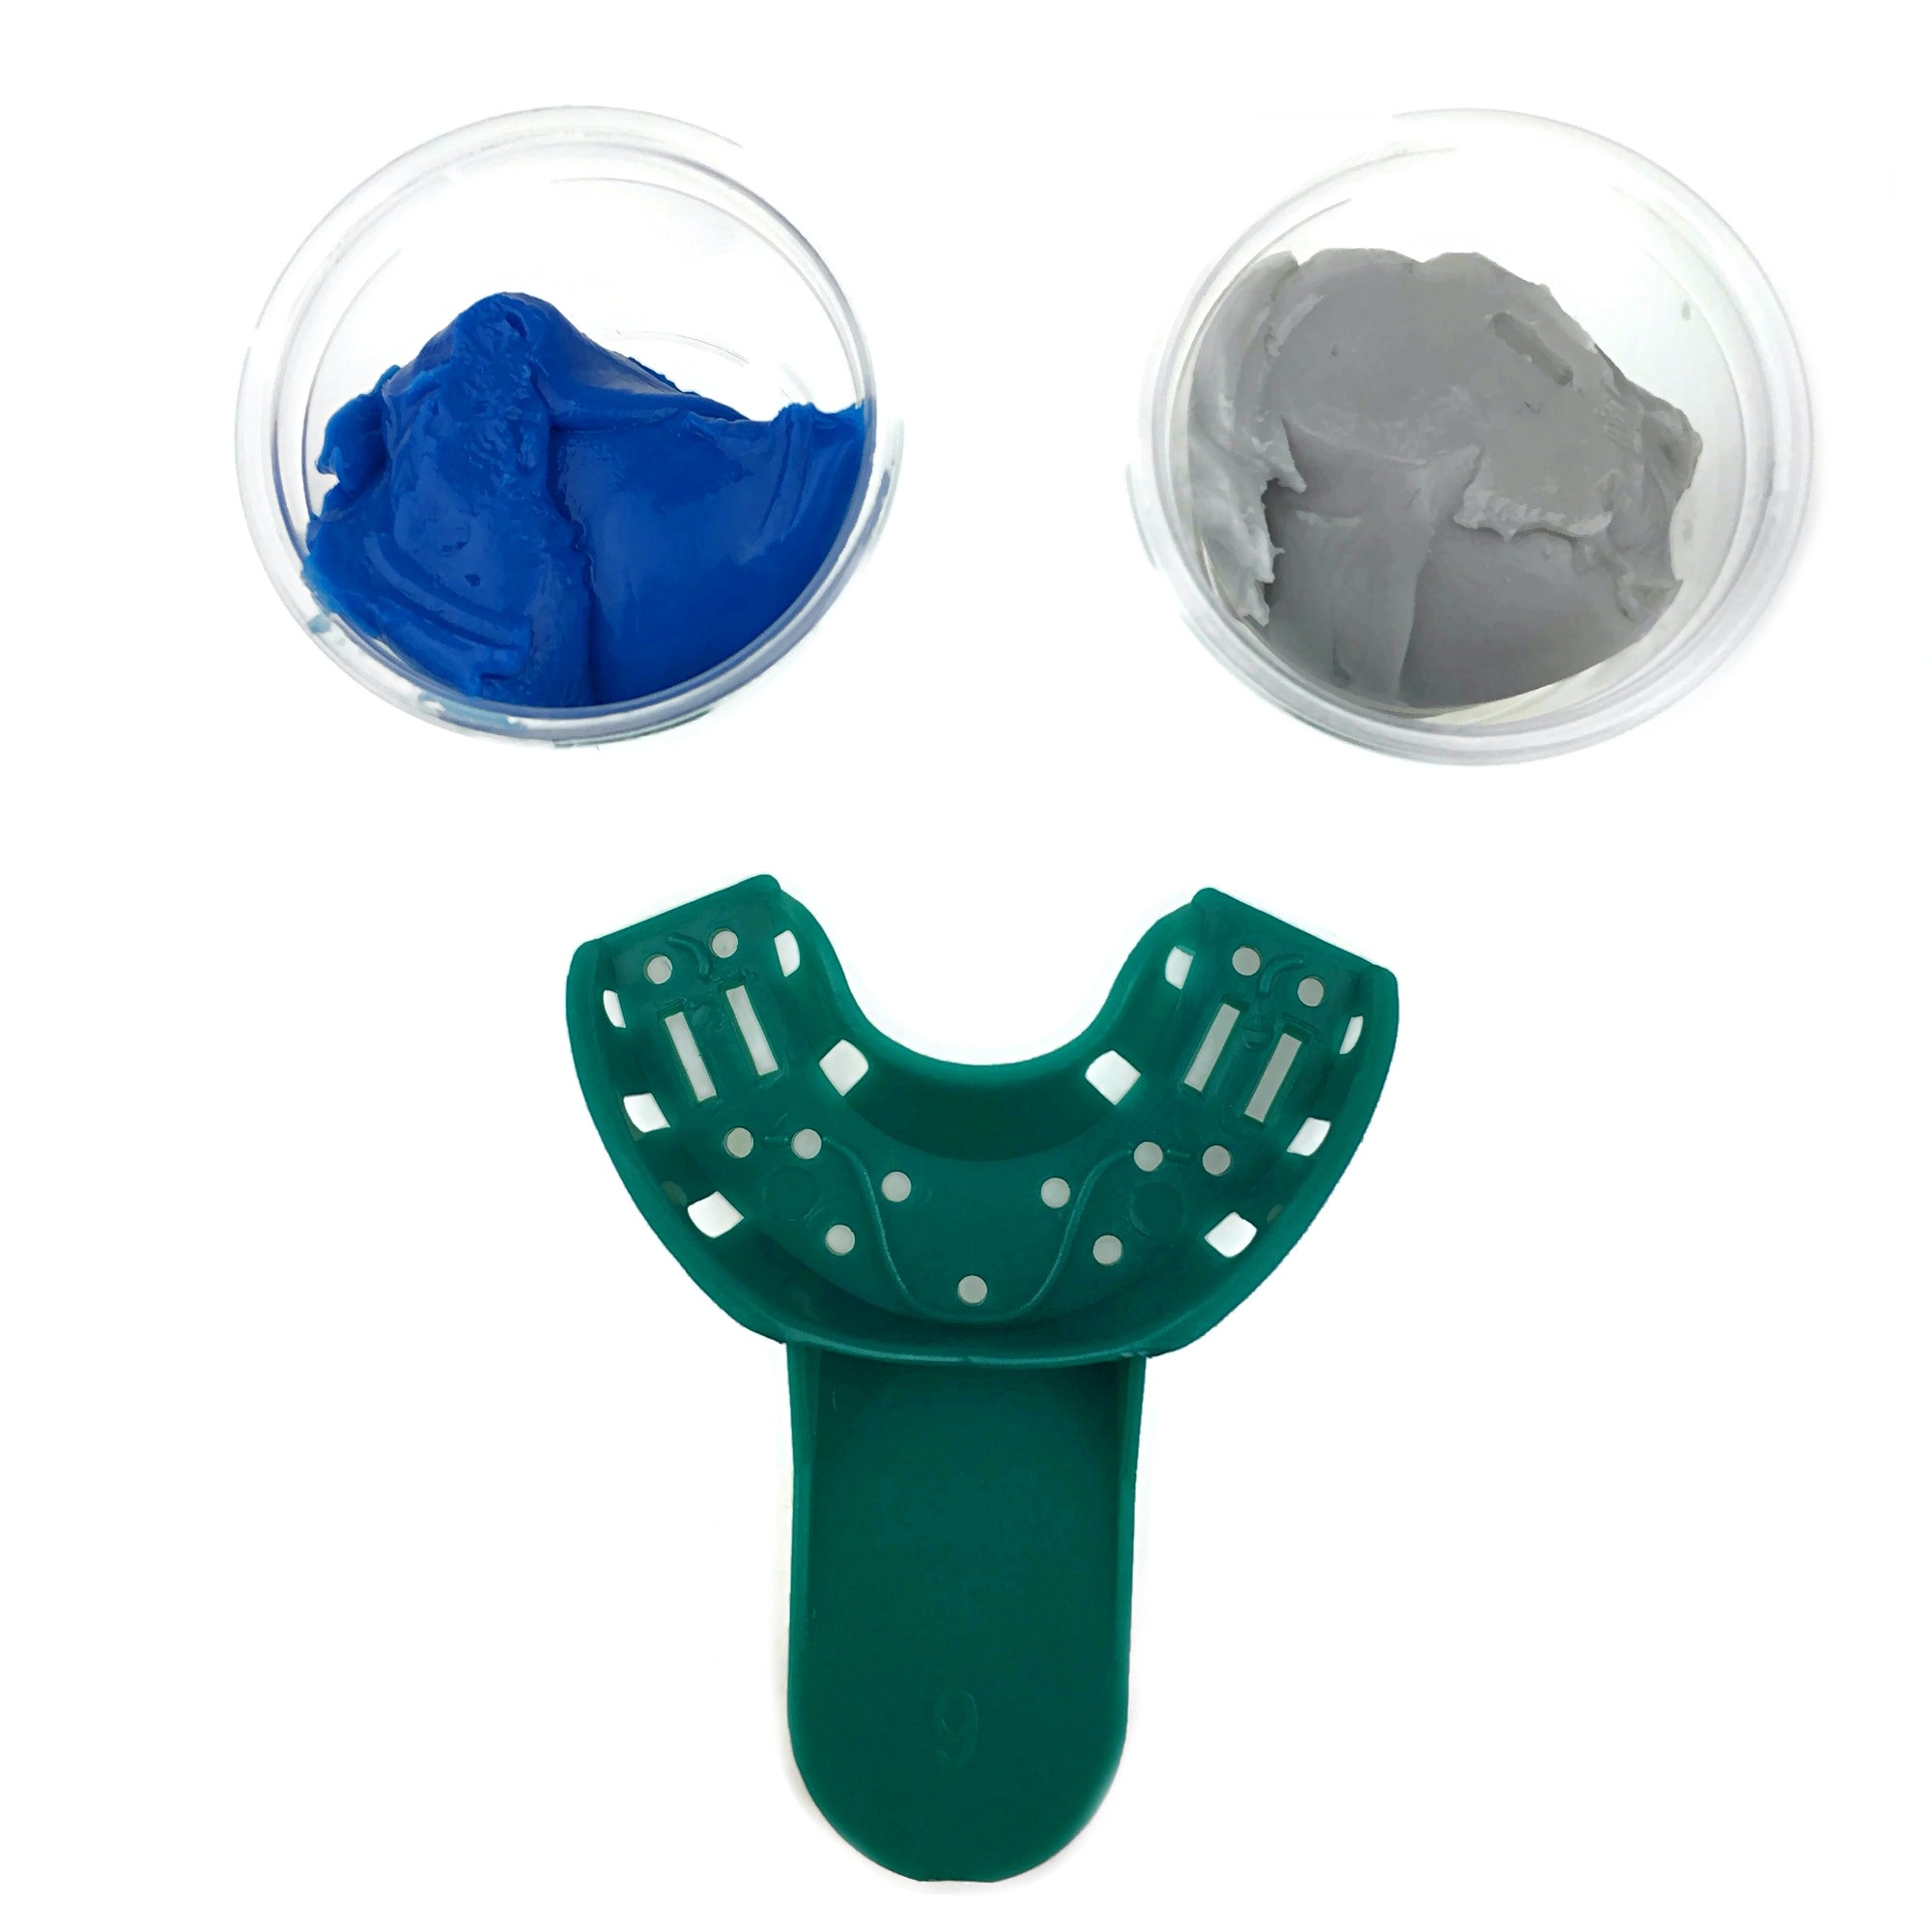 Impression Dental Mold Kit for Teeth - Retainer, Crown, Caps